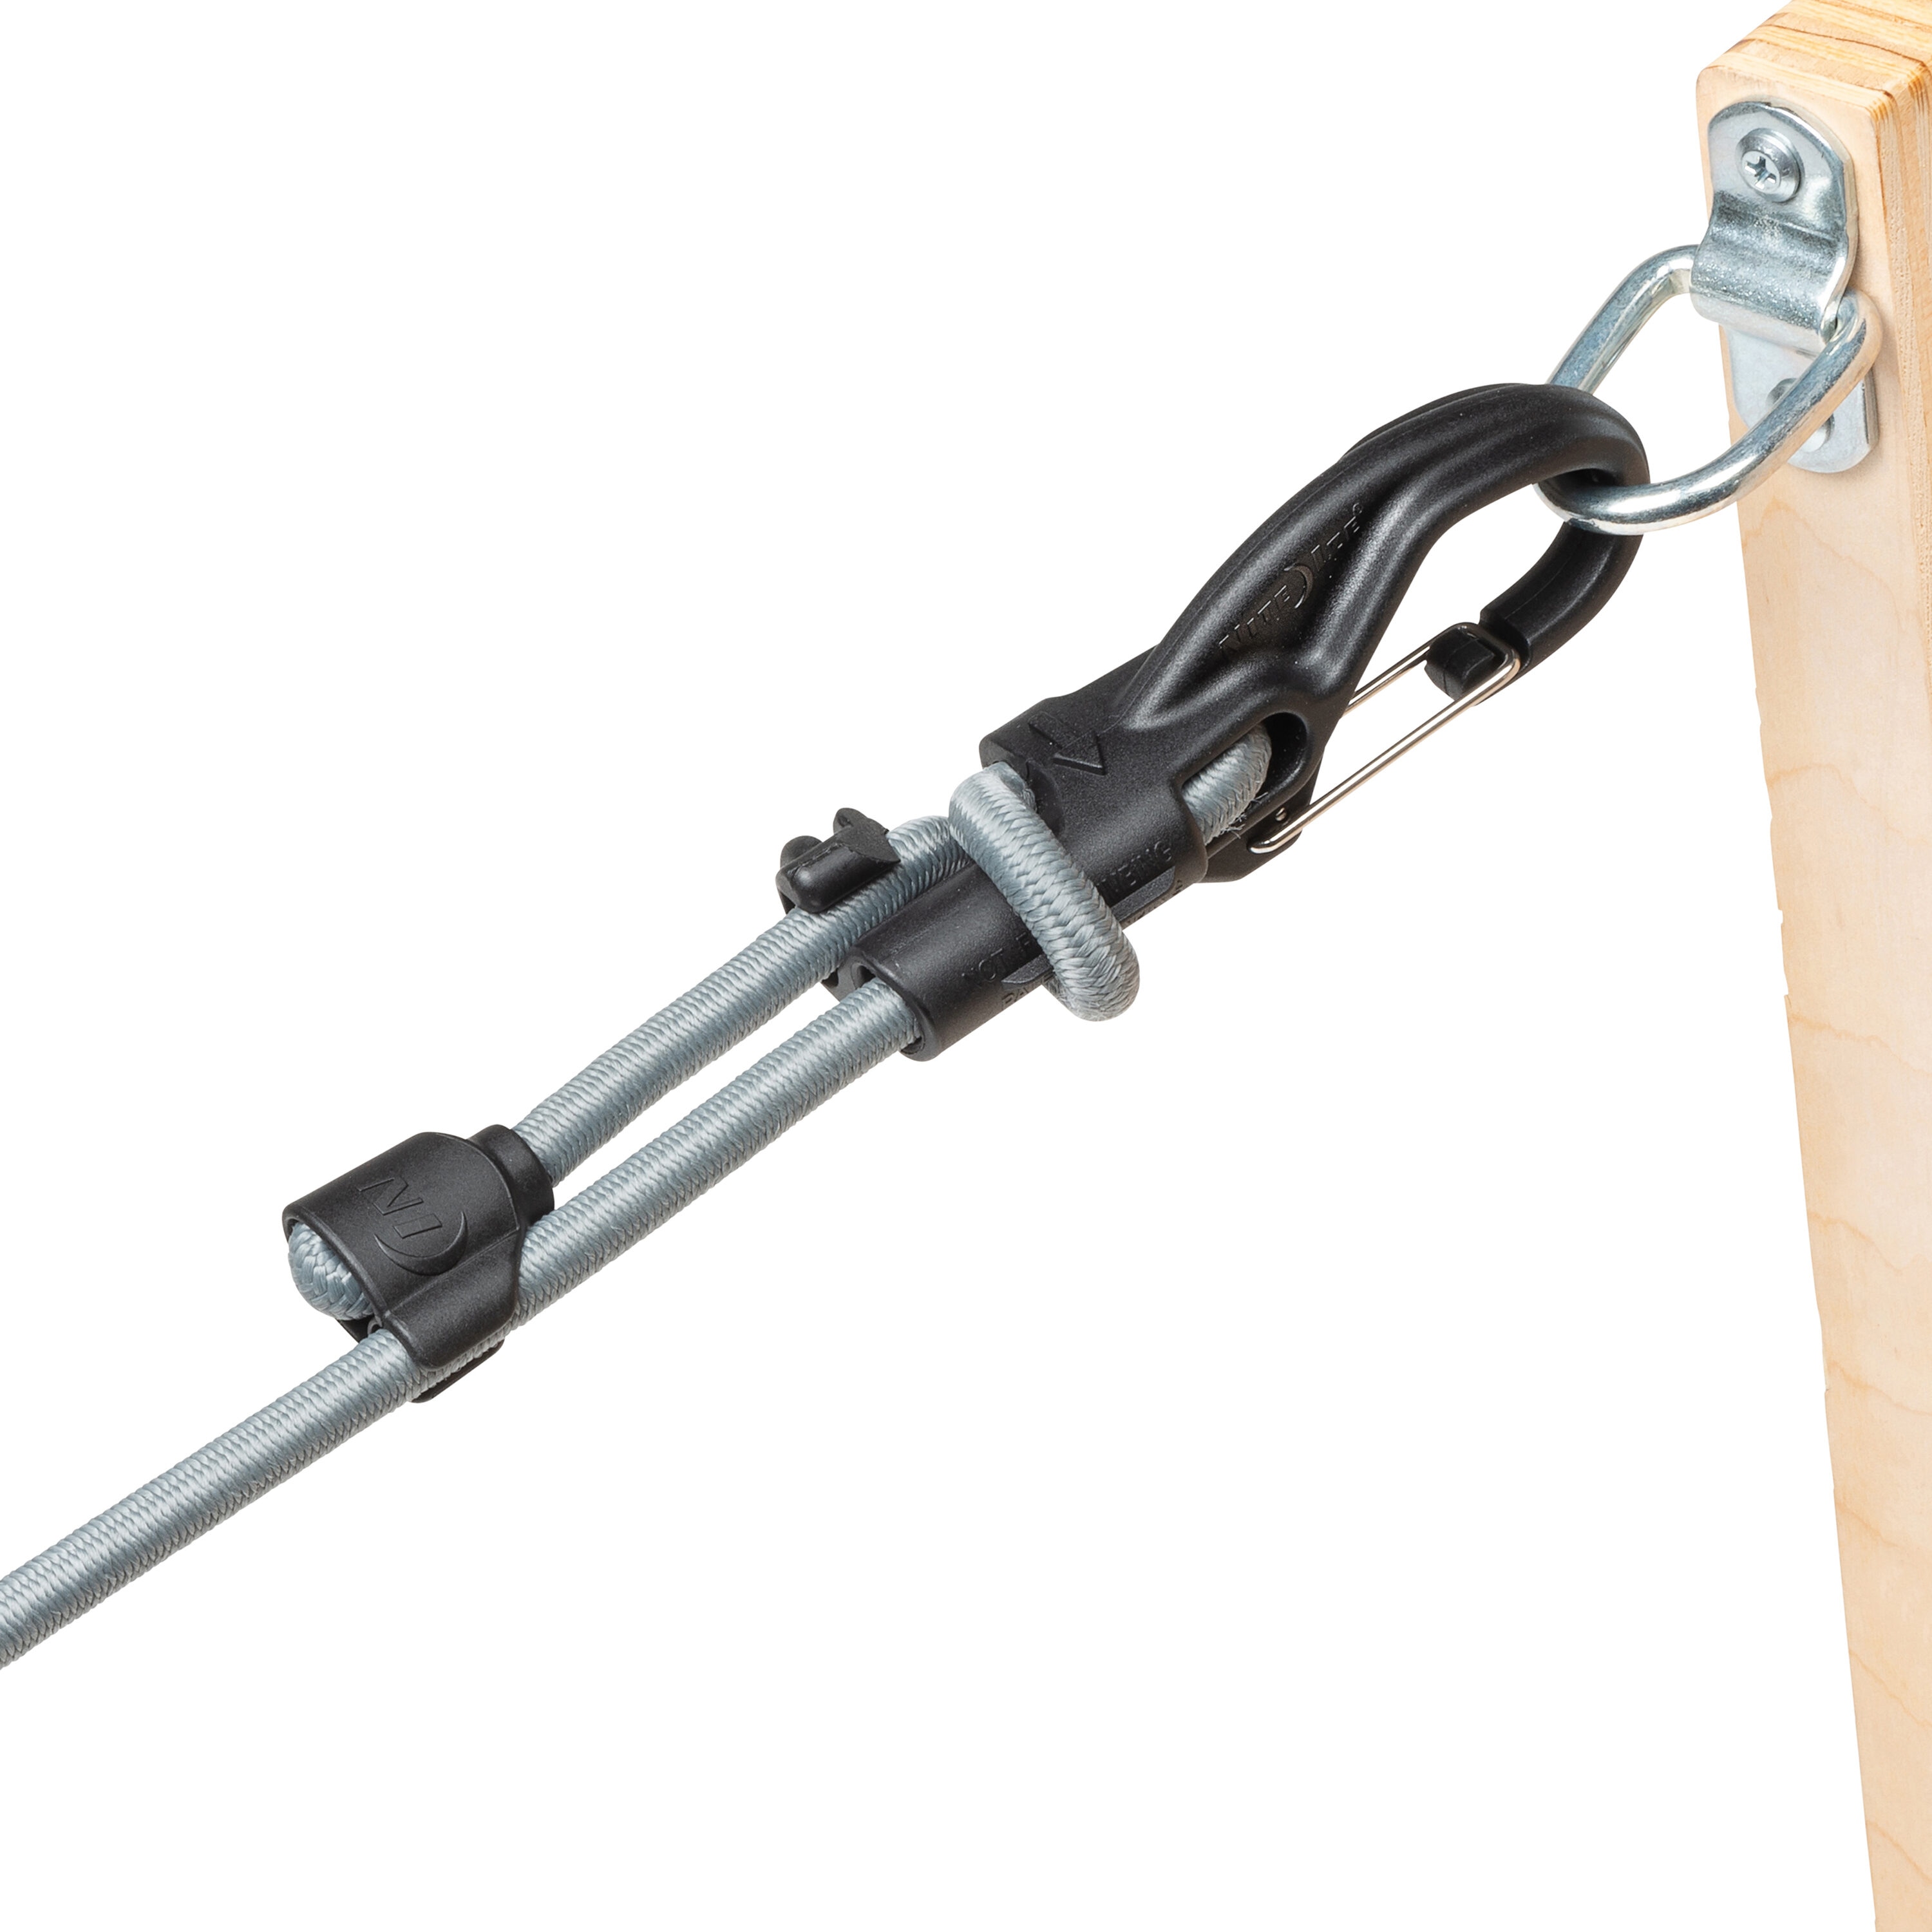 Adjustable Bungee Cords 2-Pack Only $5.98 on Lowes.com (Reg. $20